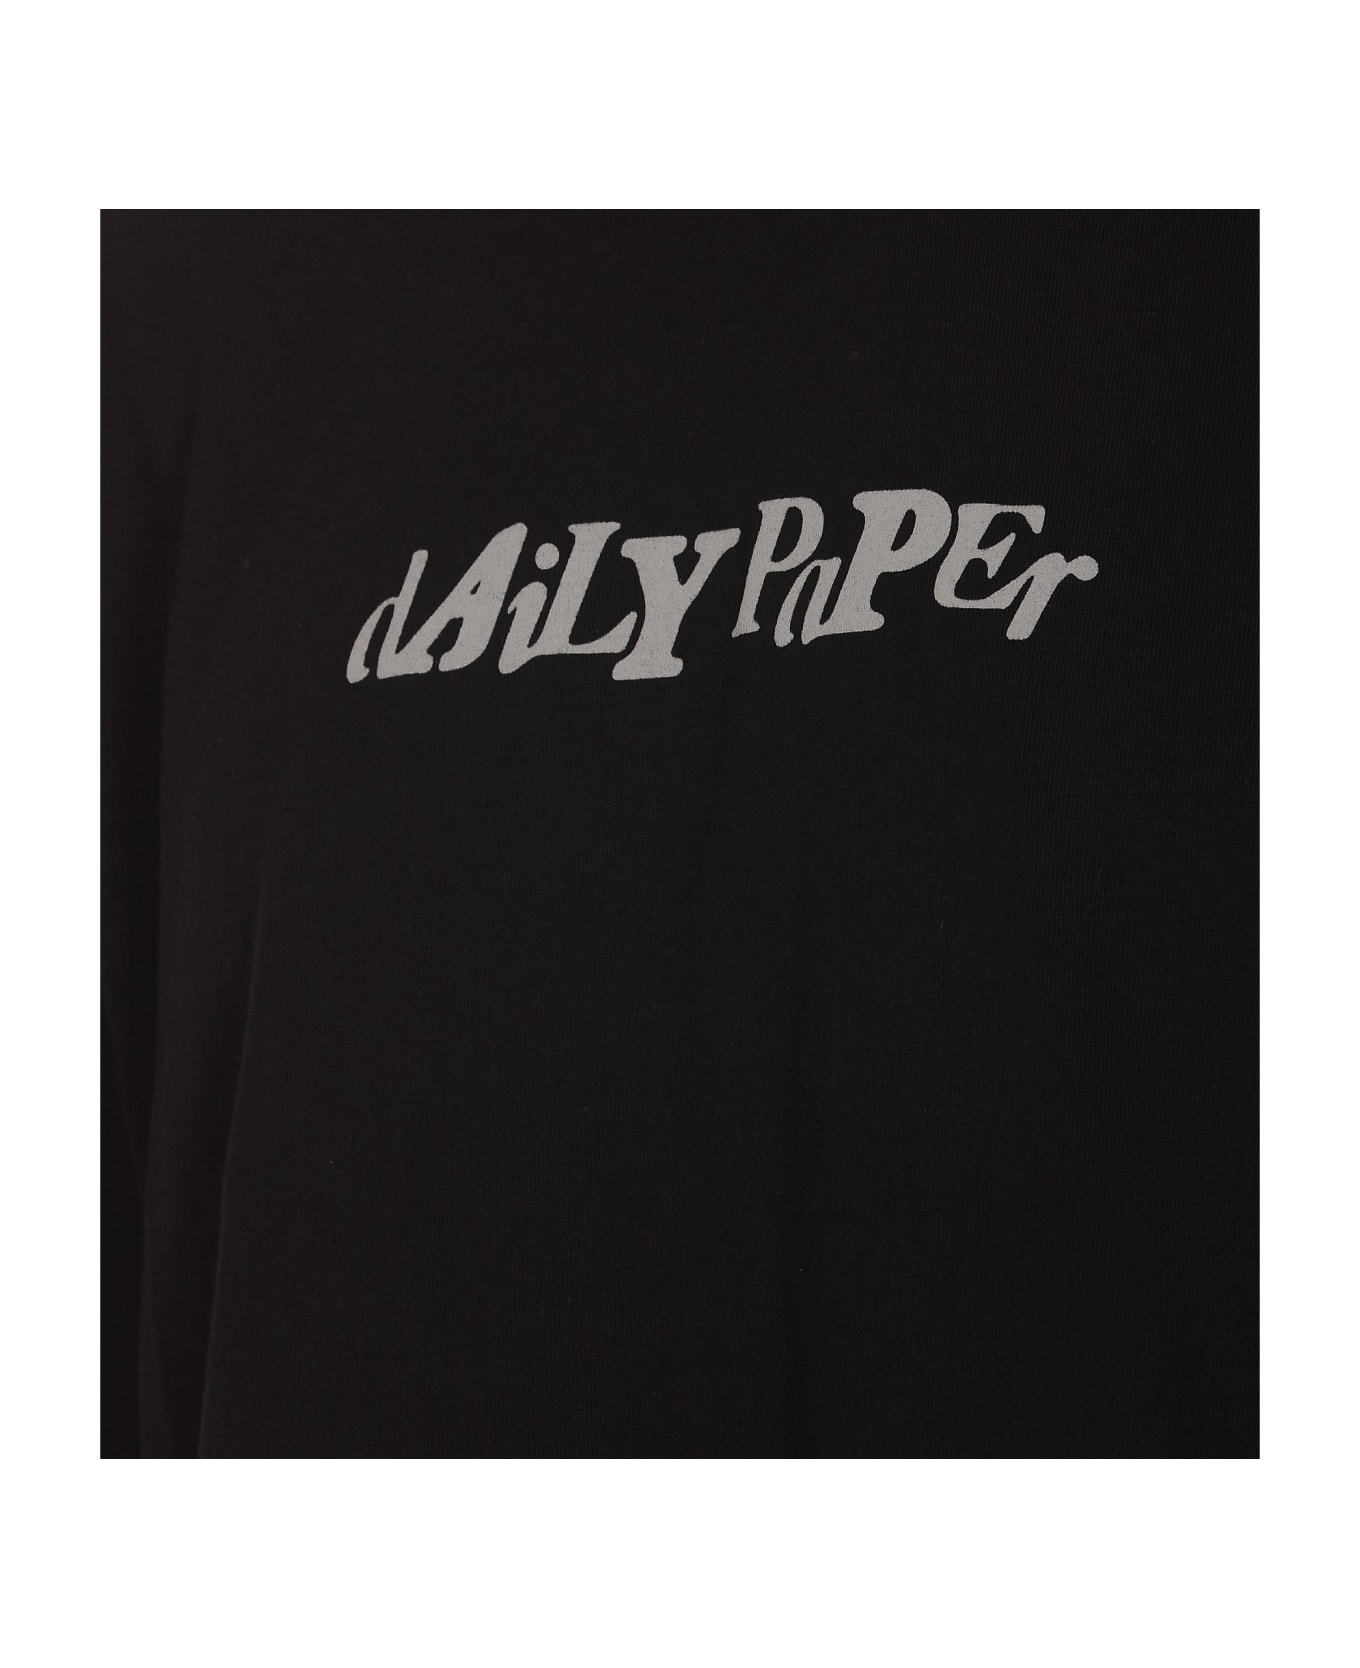 Daily Paper Unified Type Boxy T-shirt - Black